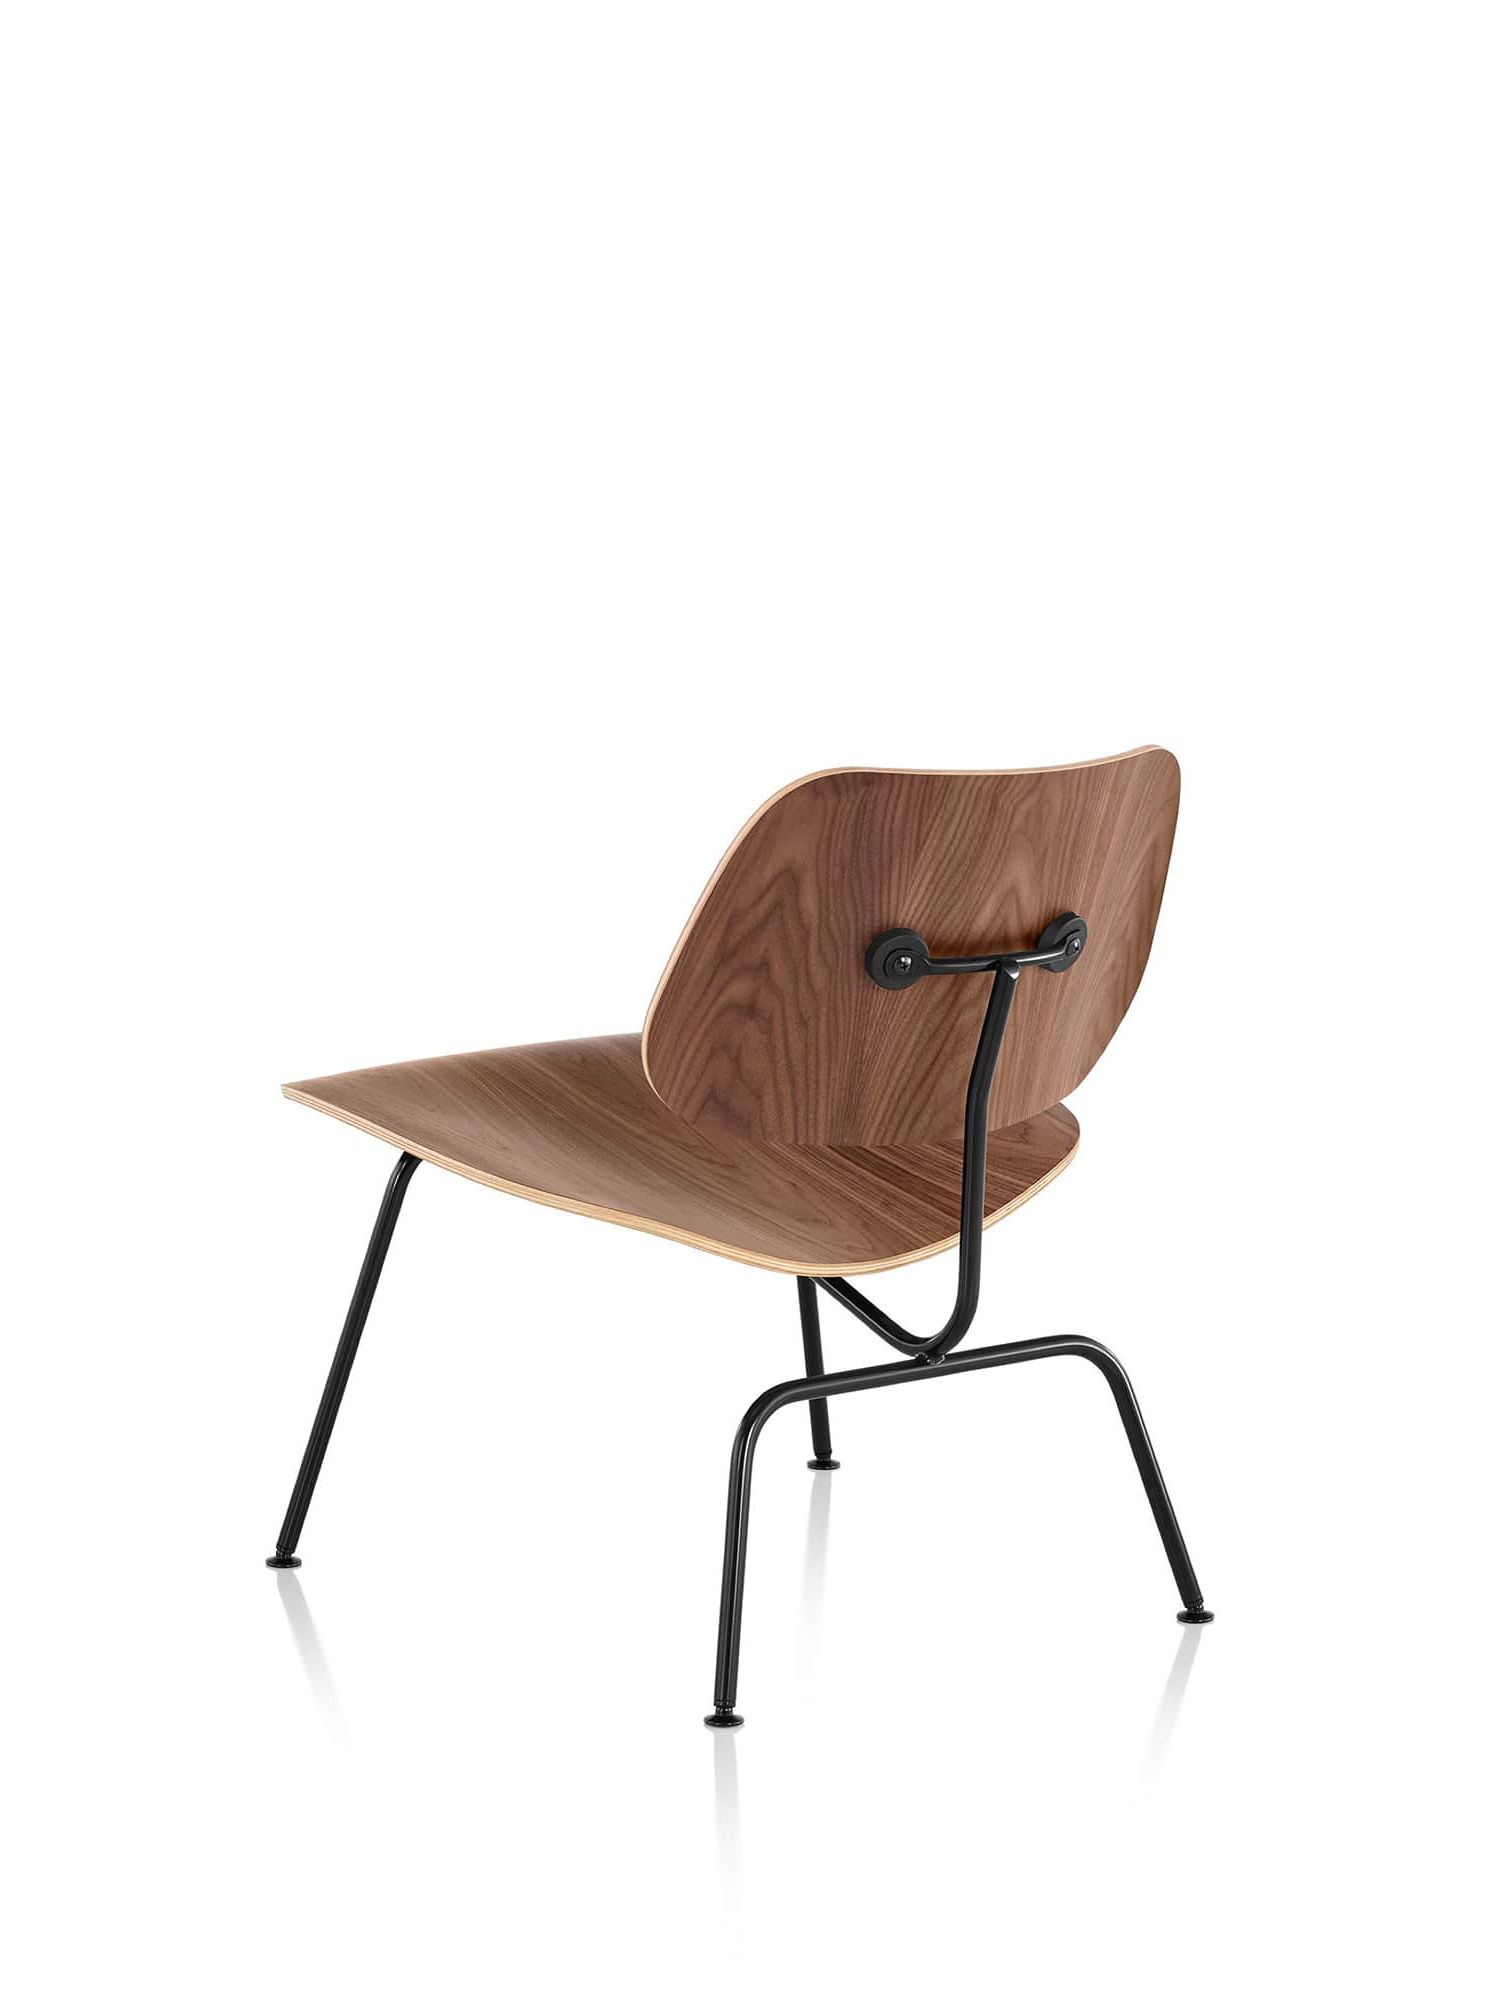 Eames Molded Plywood Lounge Chair With Metal Base – Herman Within Newest Lounge Chairs With Metal Leg (View 12 of 20)